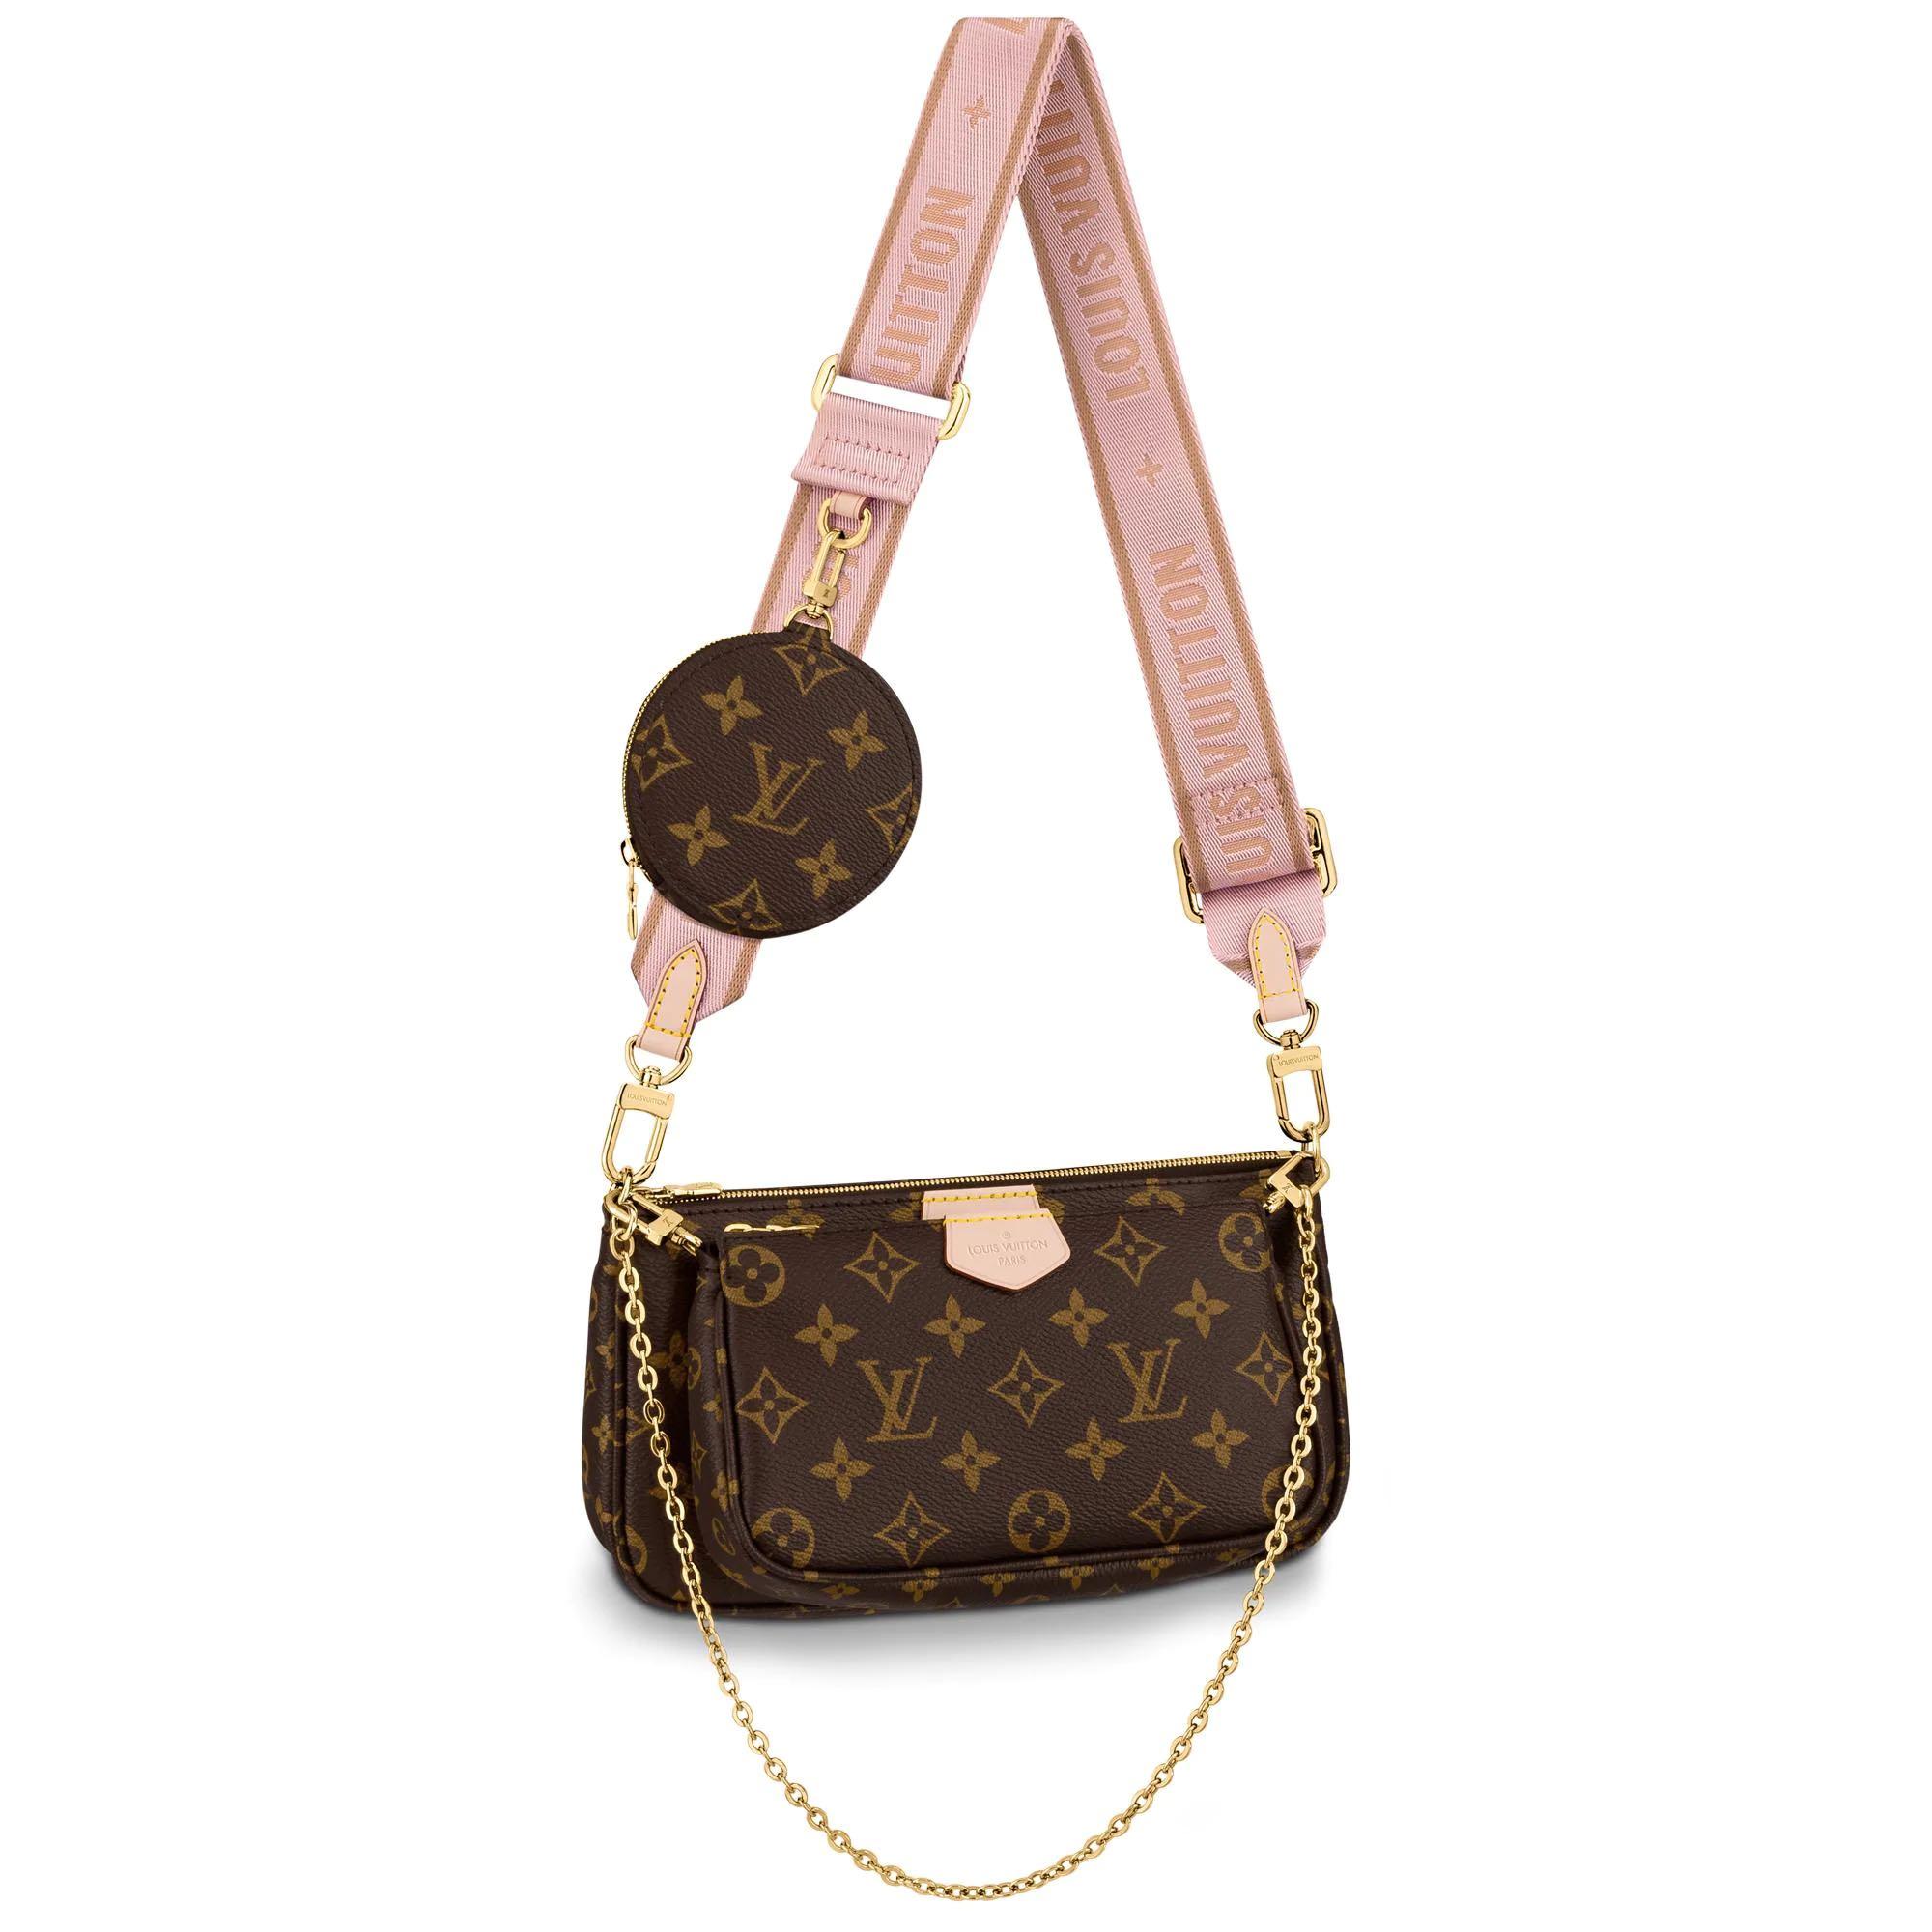 Pin by Claire Rose on CLAIRE ROSE  Louis vuitton bag neverfull, Louis  vuitton neverfull, Vuitton neverfull